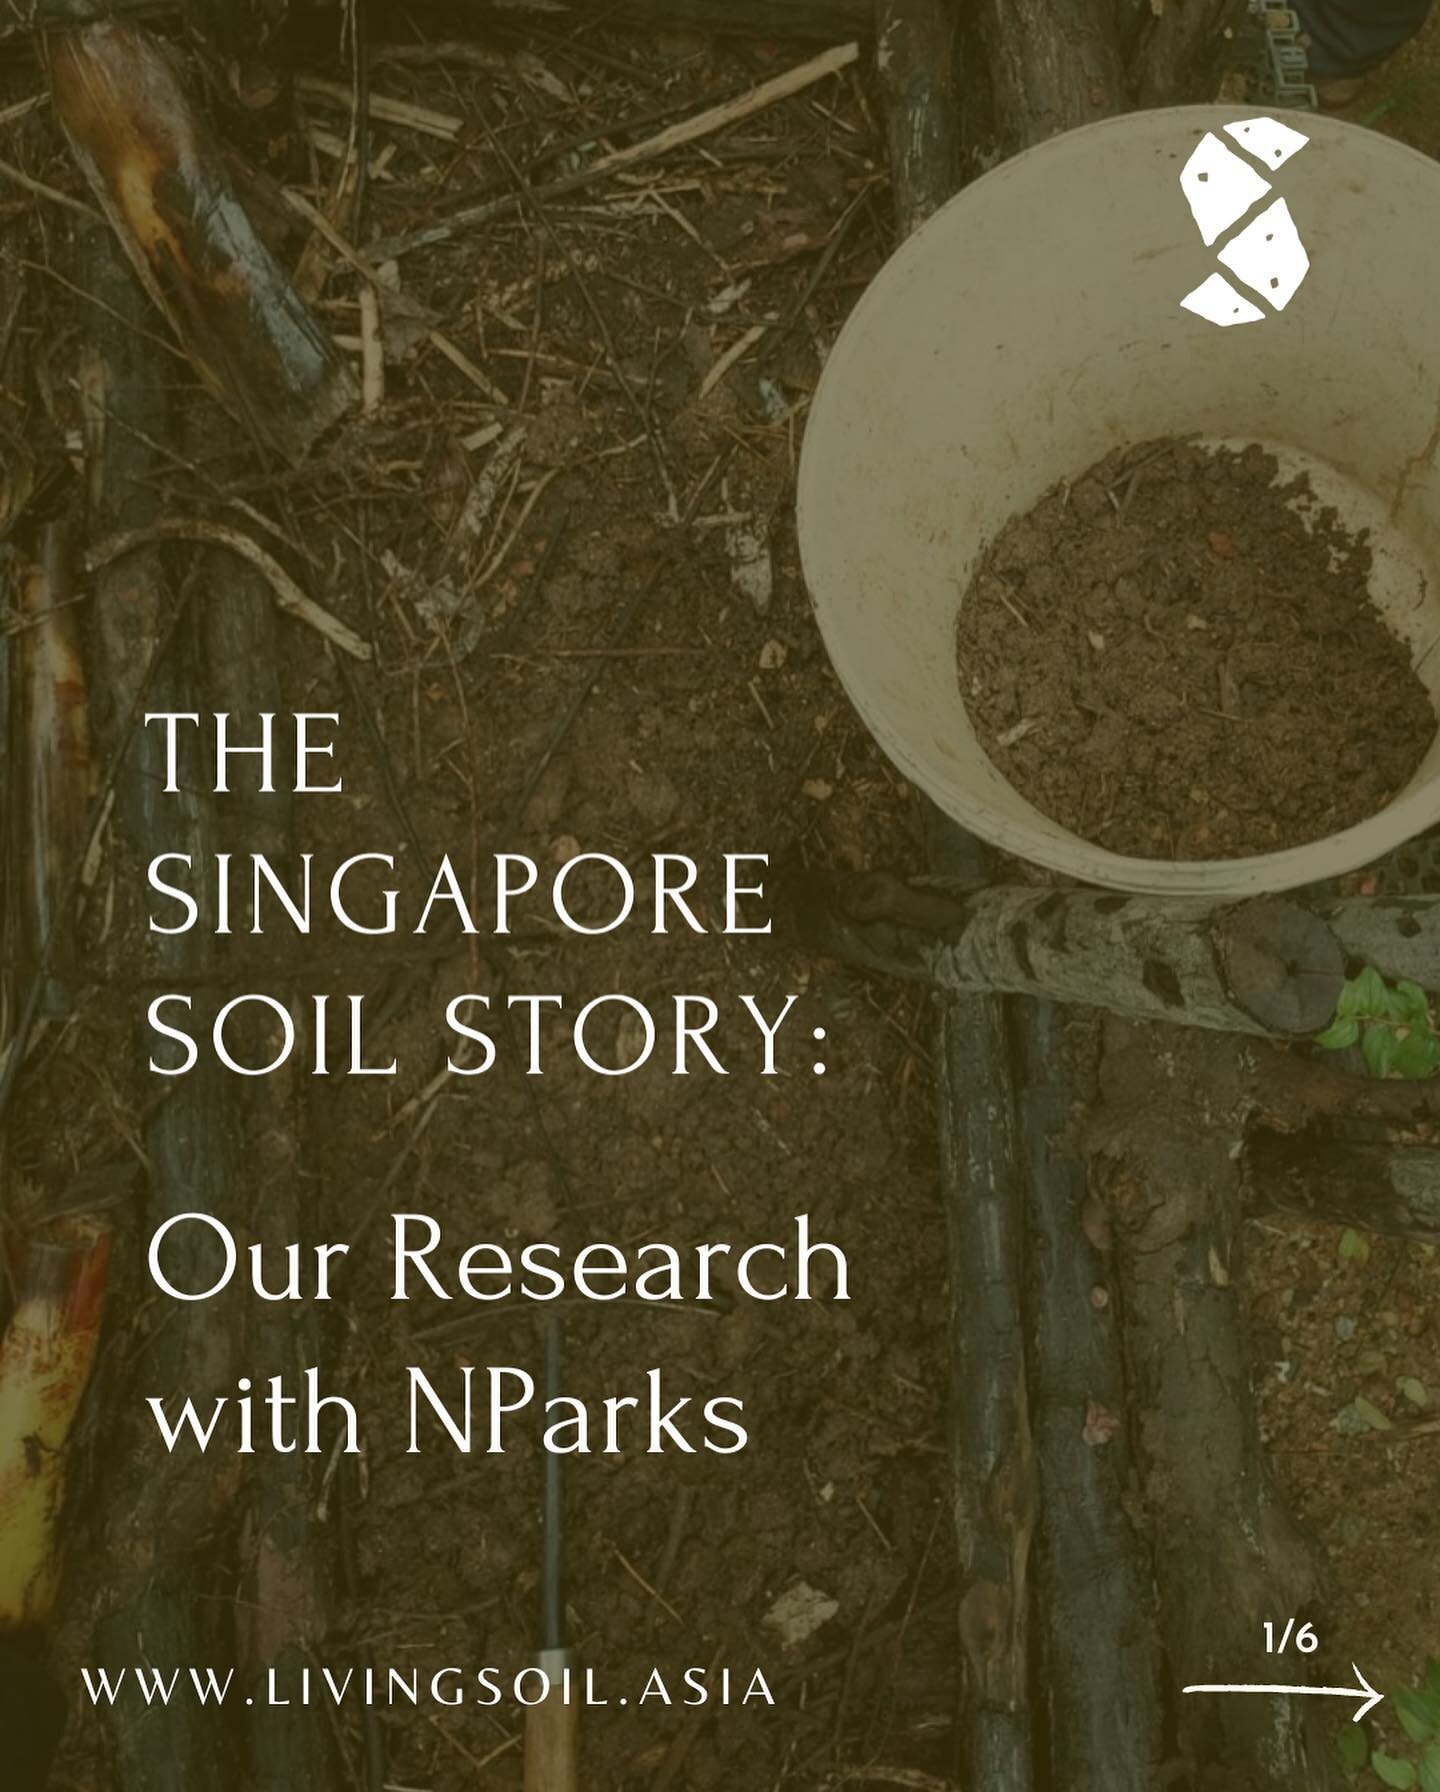 We know that we have been posting quite a bit about the loss of soil in Singapore, but the story doesn&rsquo;t end there.

While it is true that we have lost many of our farms and forests, there has been a movement that is brewing from the ground to 